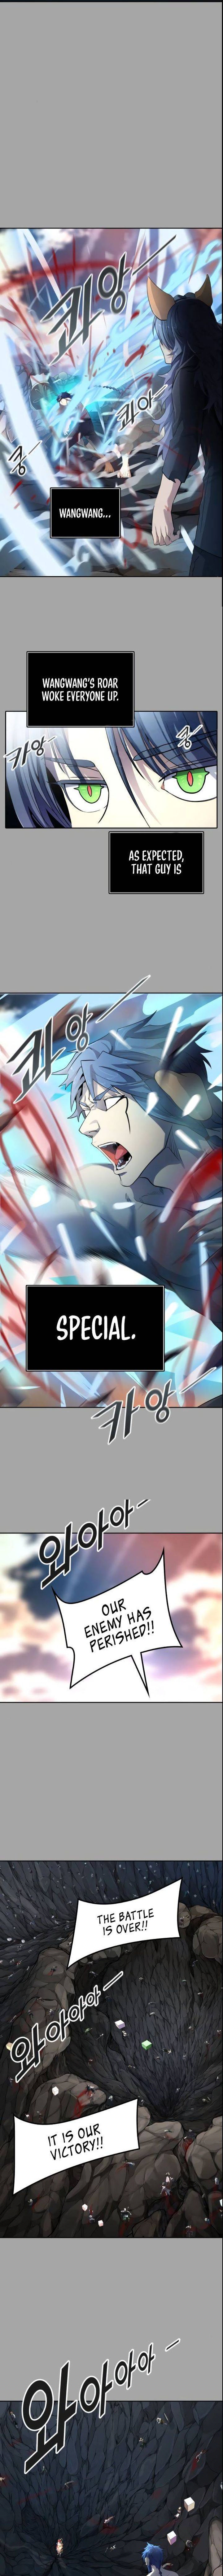 Tower Of God 527 19